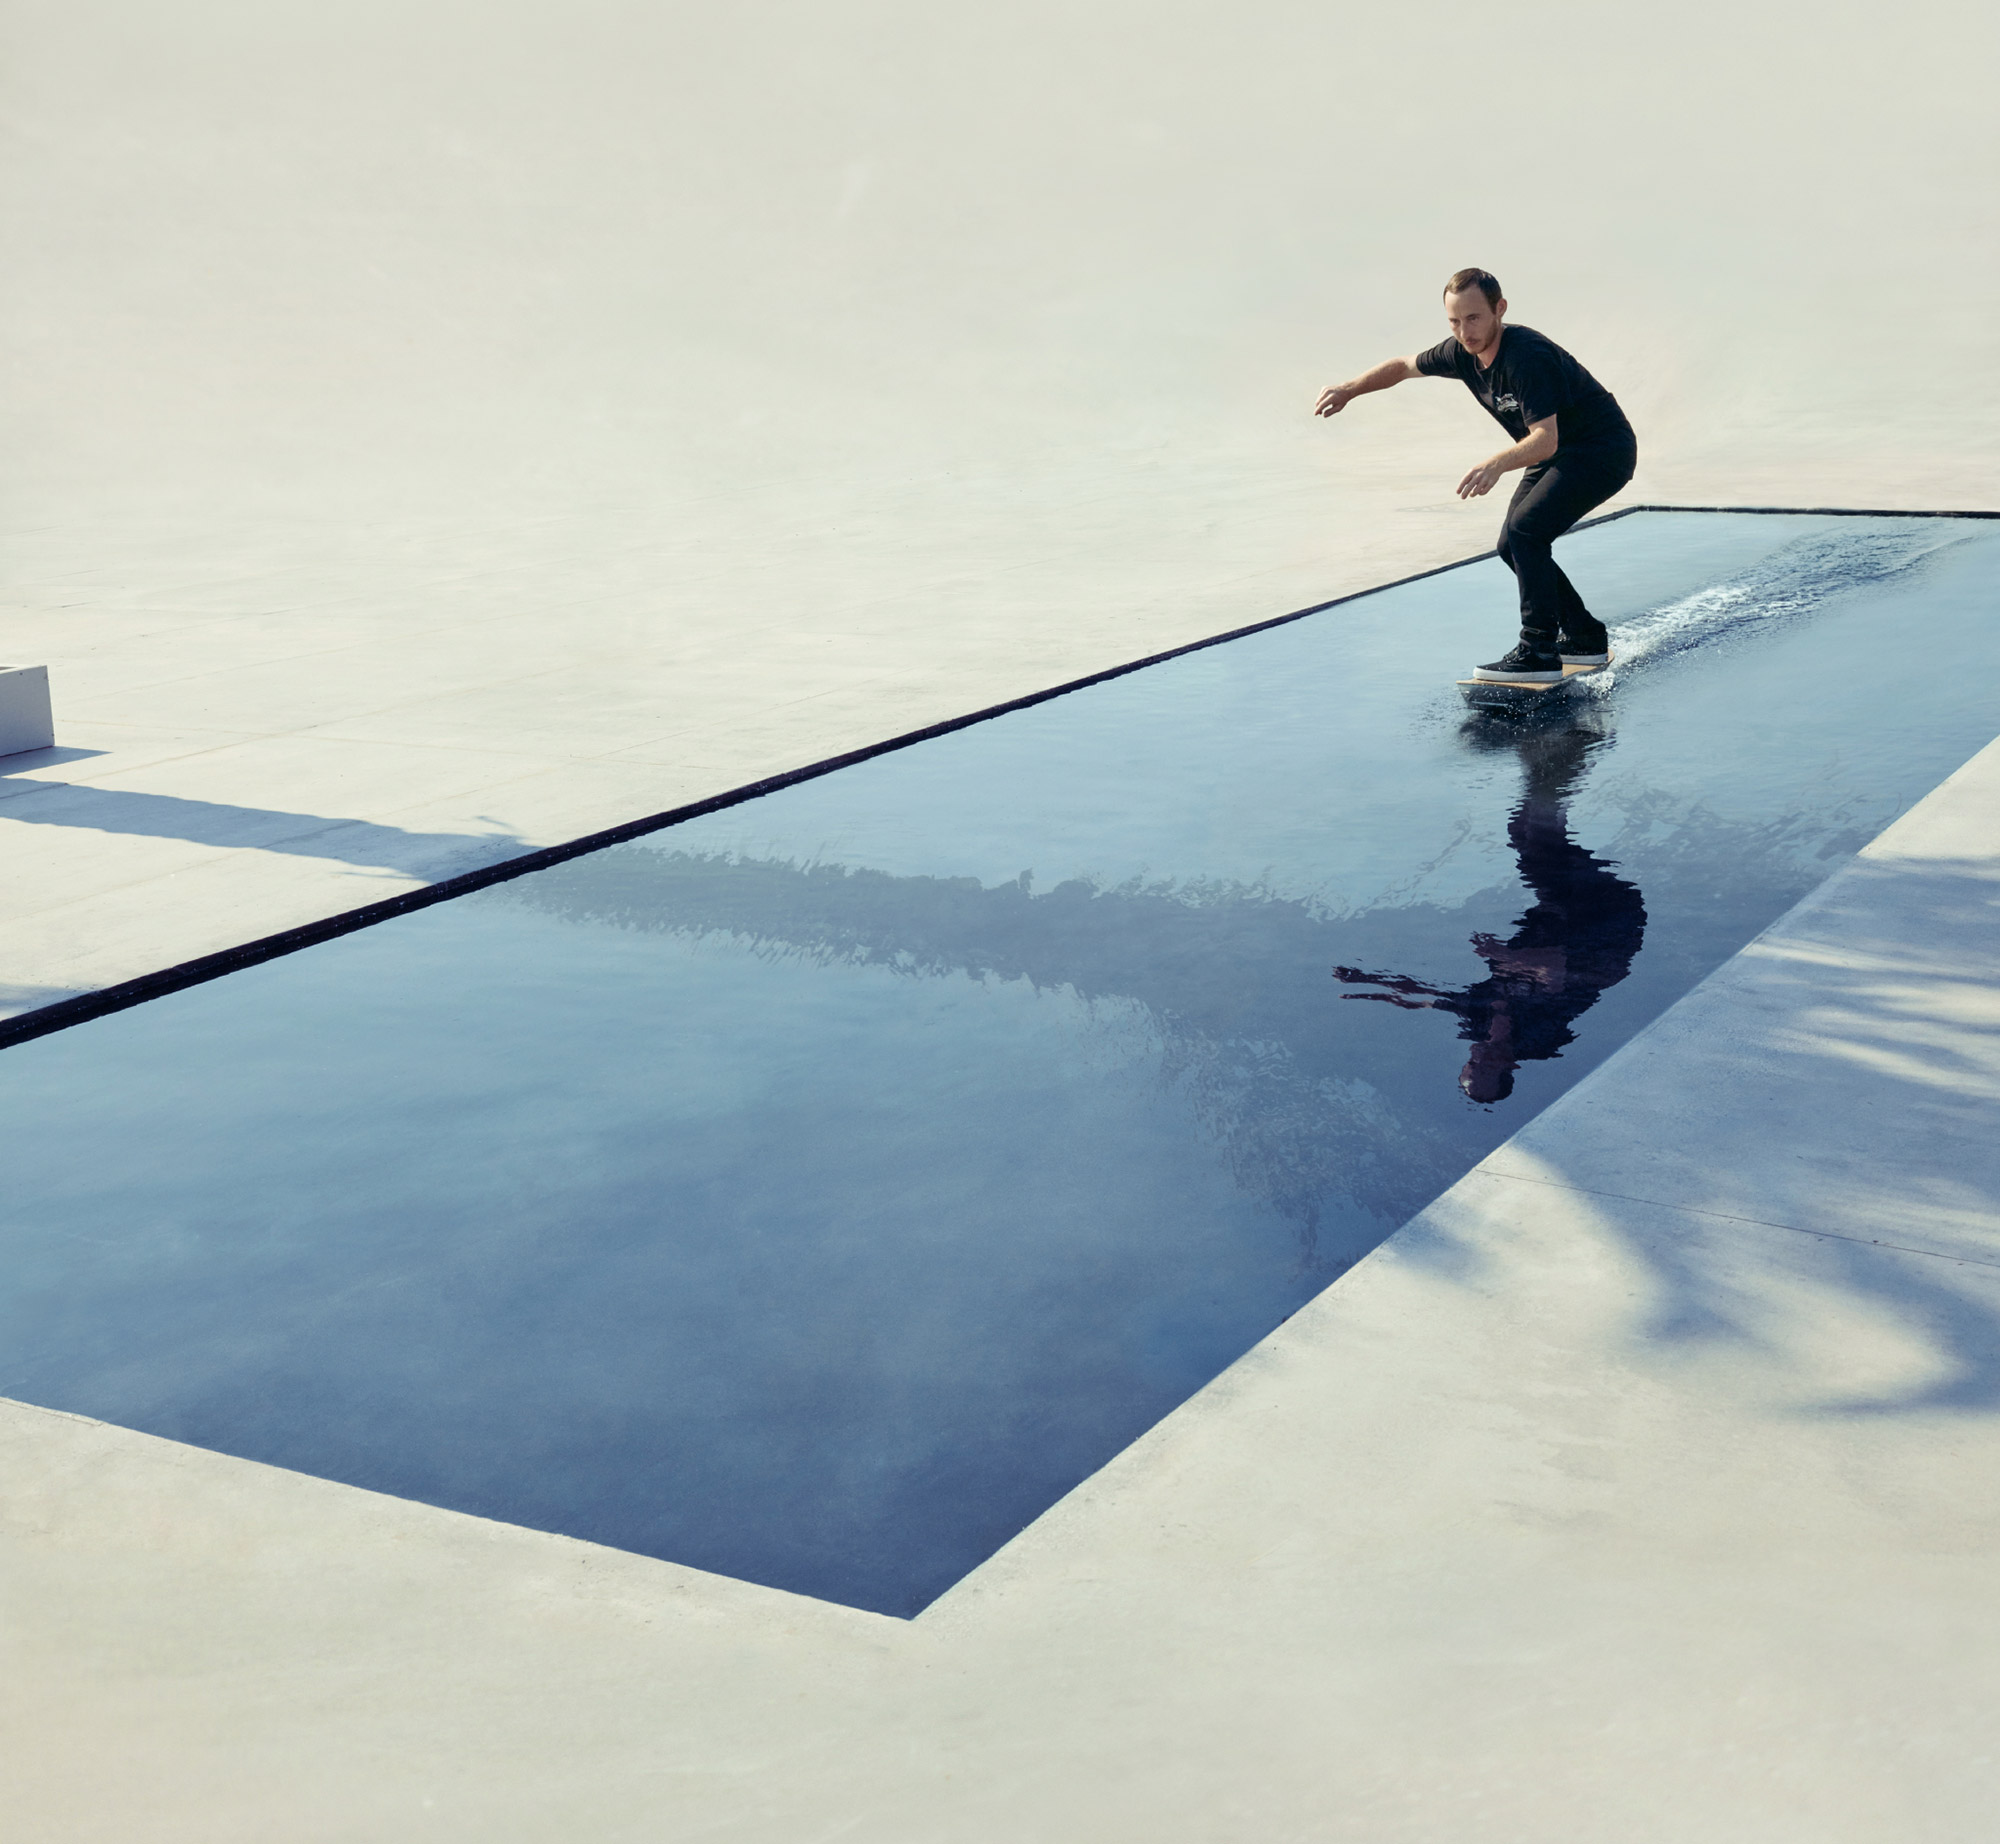 The Lexus Hoverboard Is Real…and Looks Very Difficult to Ride